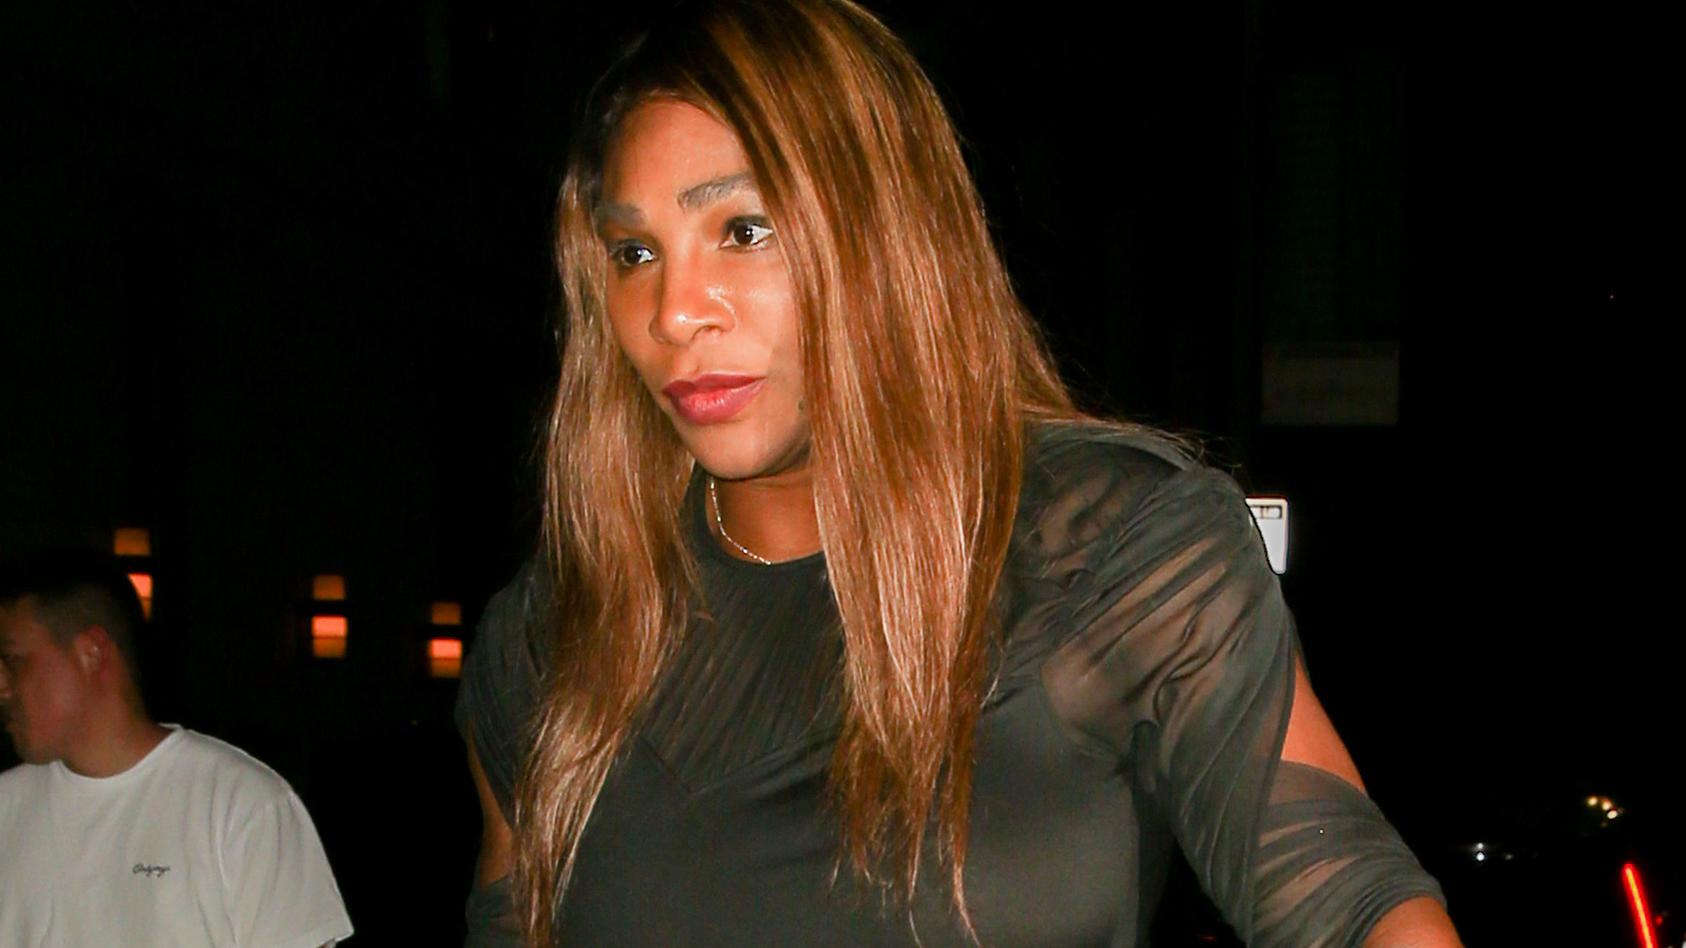 Serena Williams and husband are seen leaving the Edward Enninful's memoir bash in New York CityPictured: Serena WilliamsRef: SPL5420004 080922 NON-EXCLUSIVEPicture by: Felipe Ramales / SplashNews.comWorld Rights, 